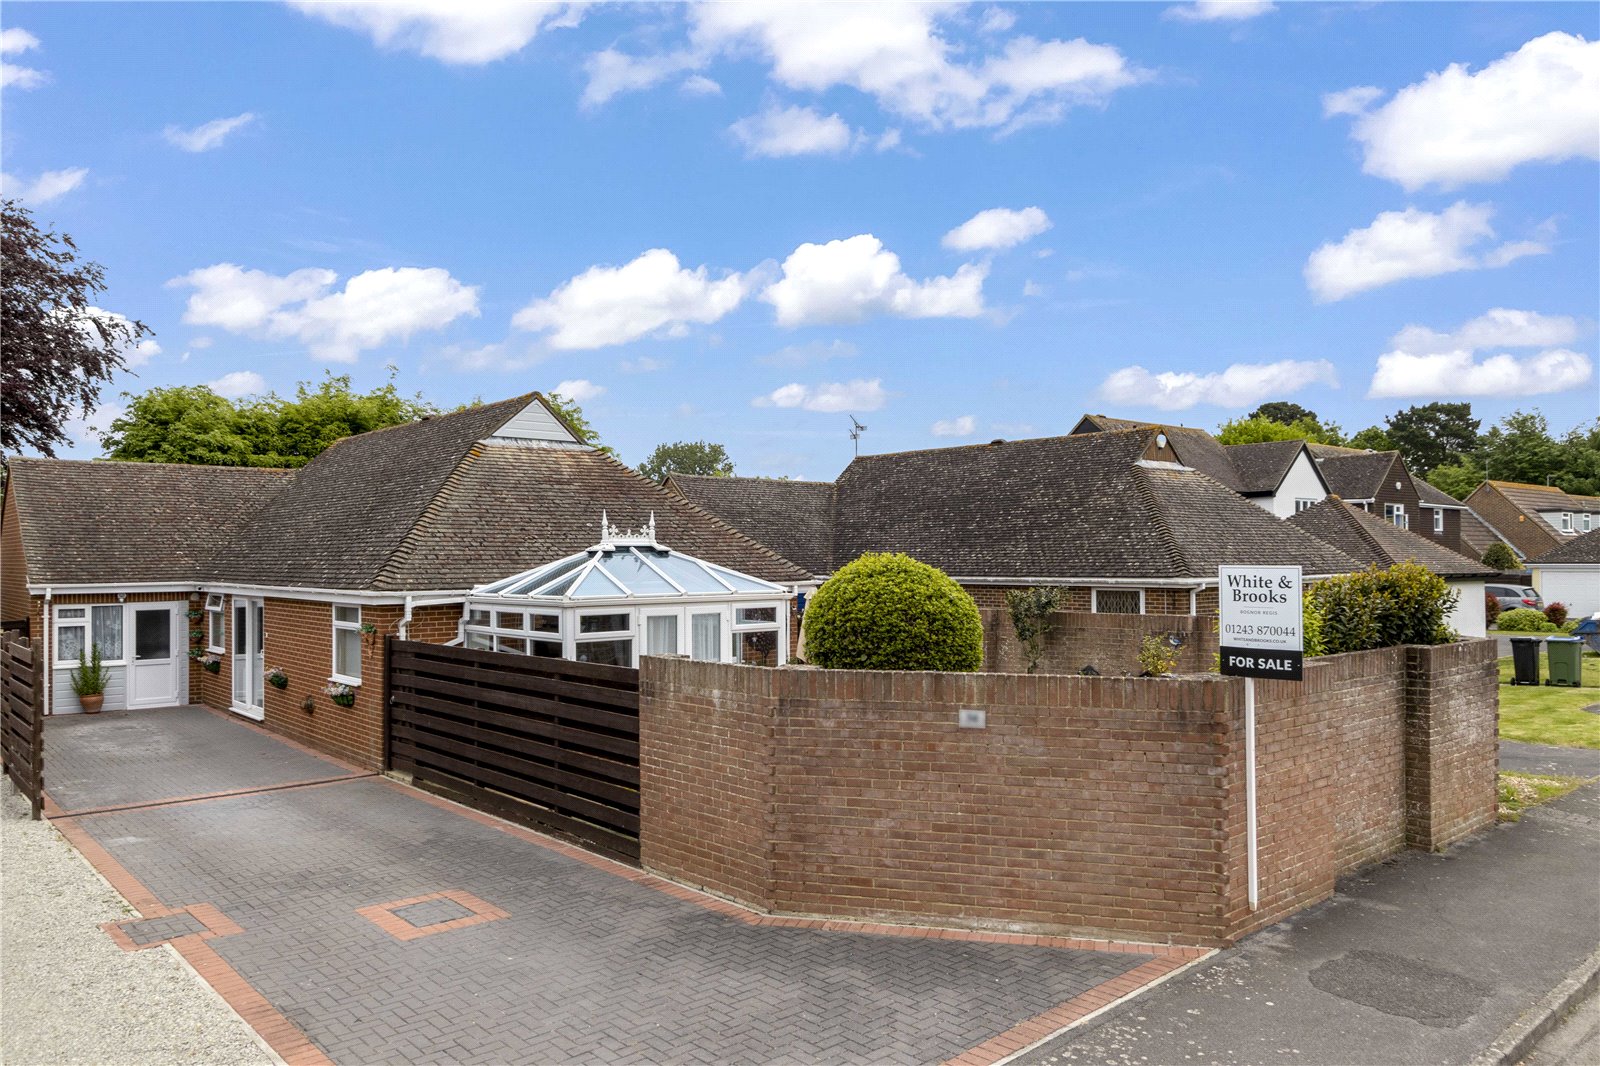 3 bed bungalow for sale in Chawkmare Coppice, Bognor Regis - Property Image 1